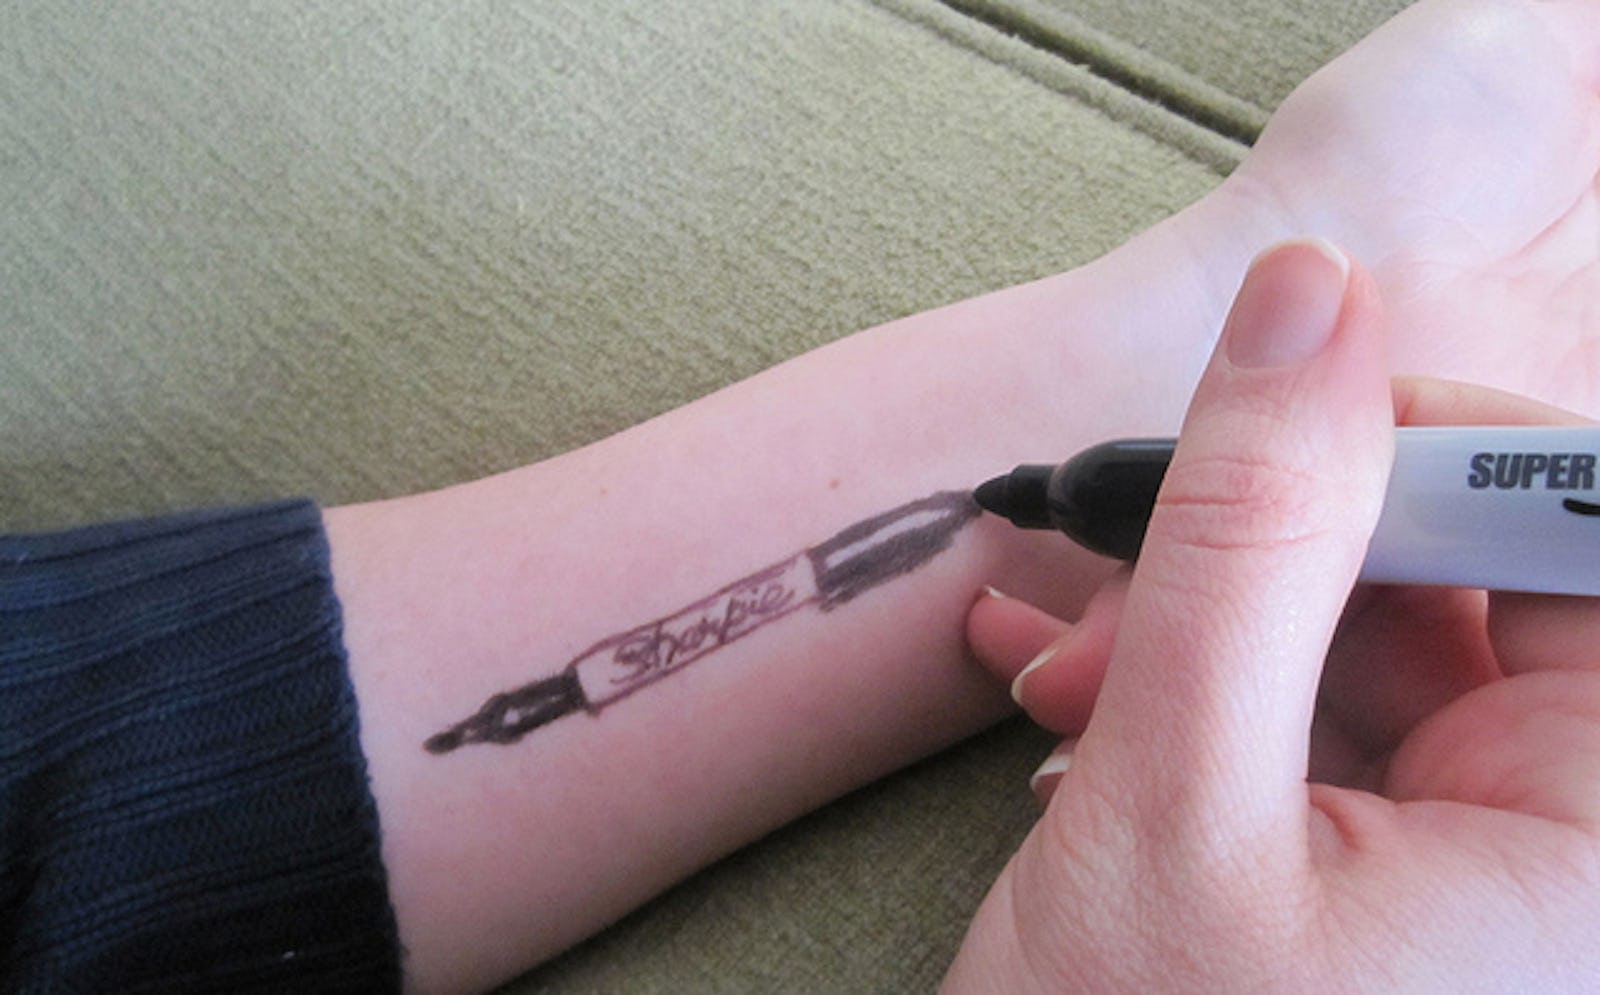 Are Sharpie Tattoos Safe Or Should You Refrain From Scribbling On Yourself?